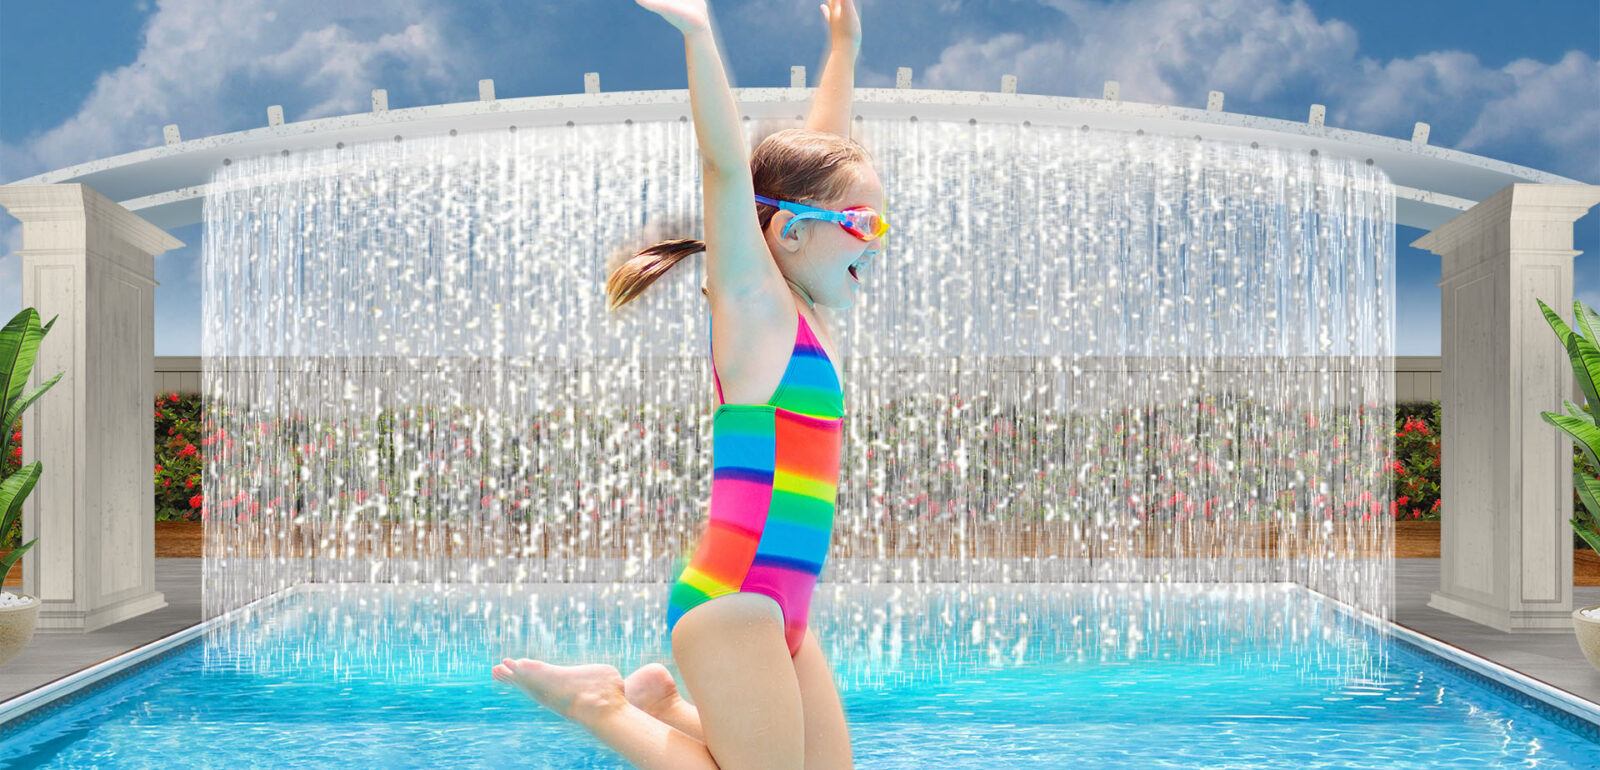 Young girl in a rainbow bathing suit jumping into our Diamond Beach resort pool